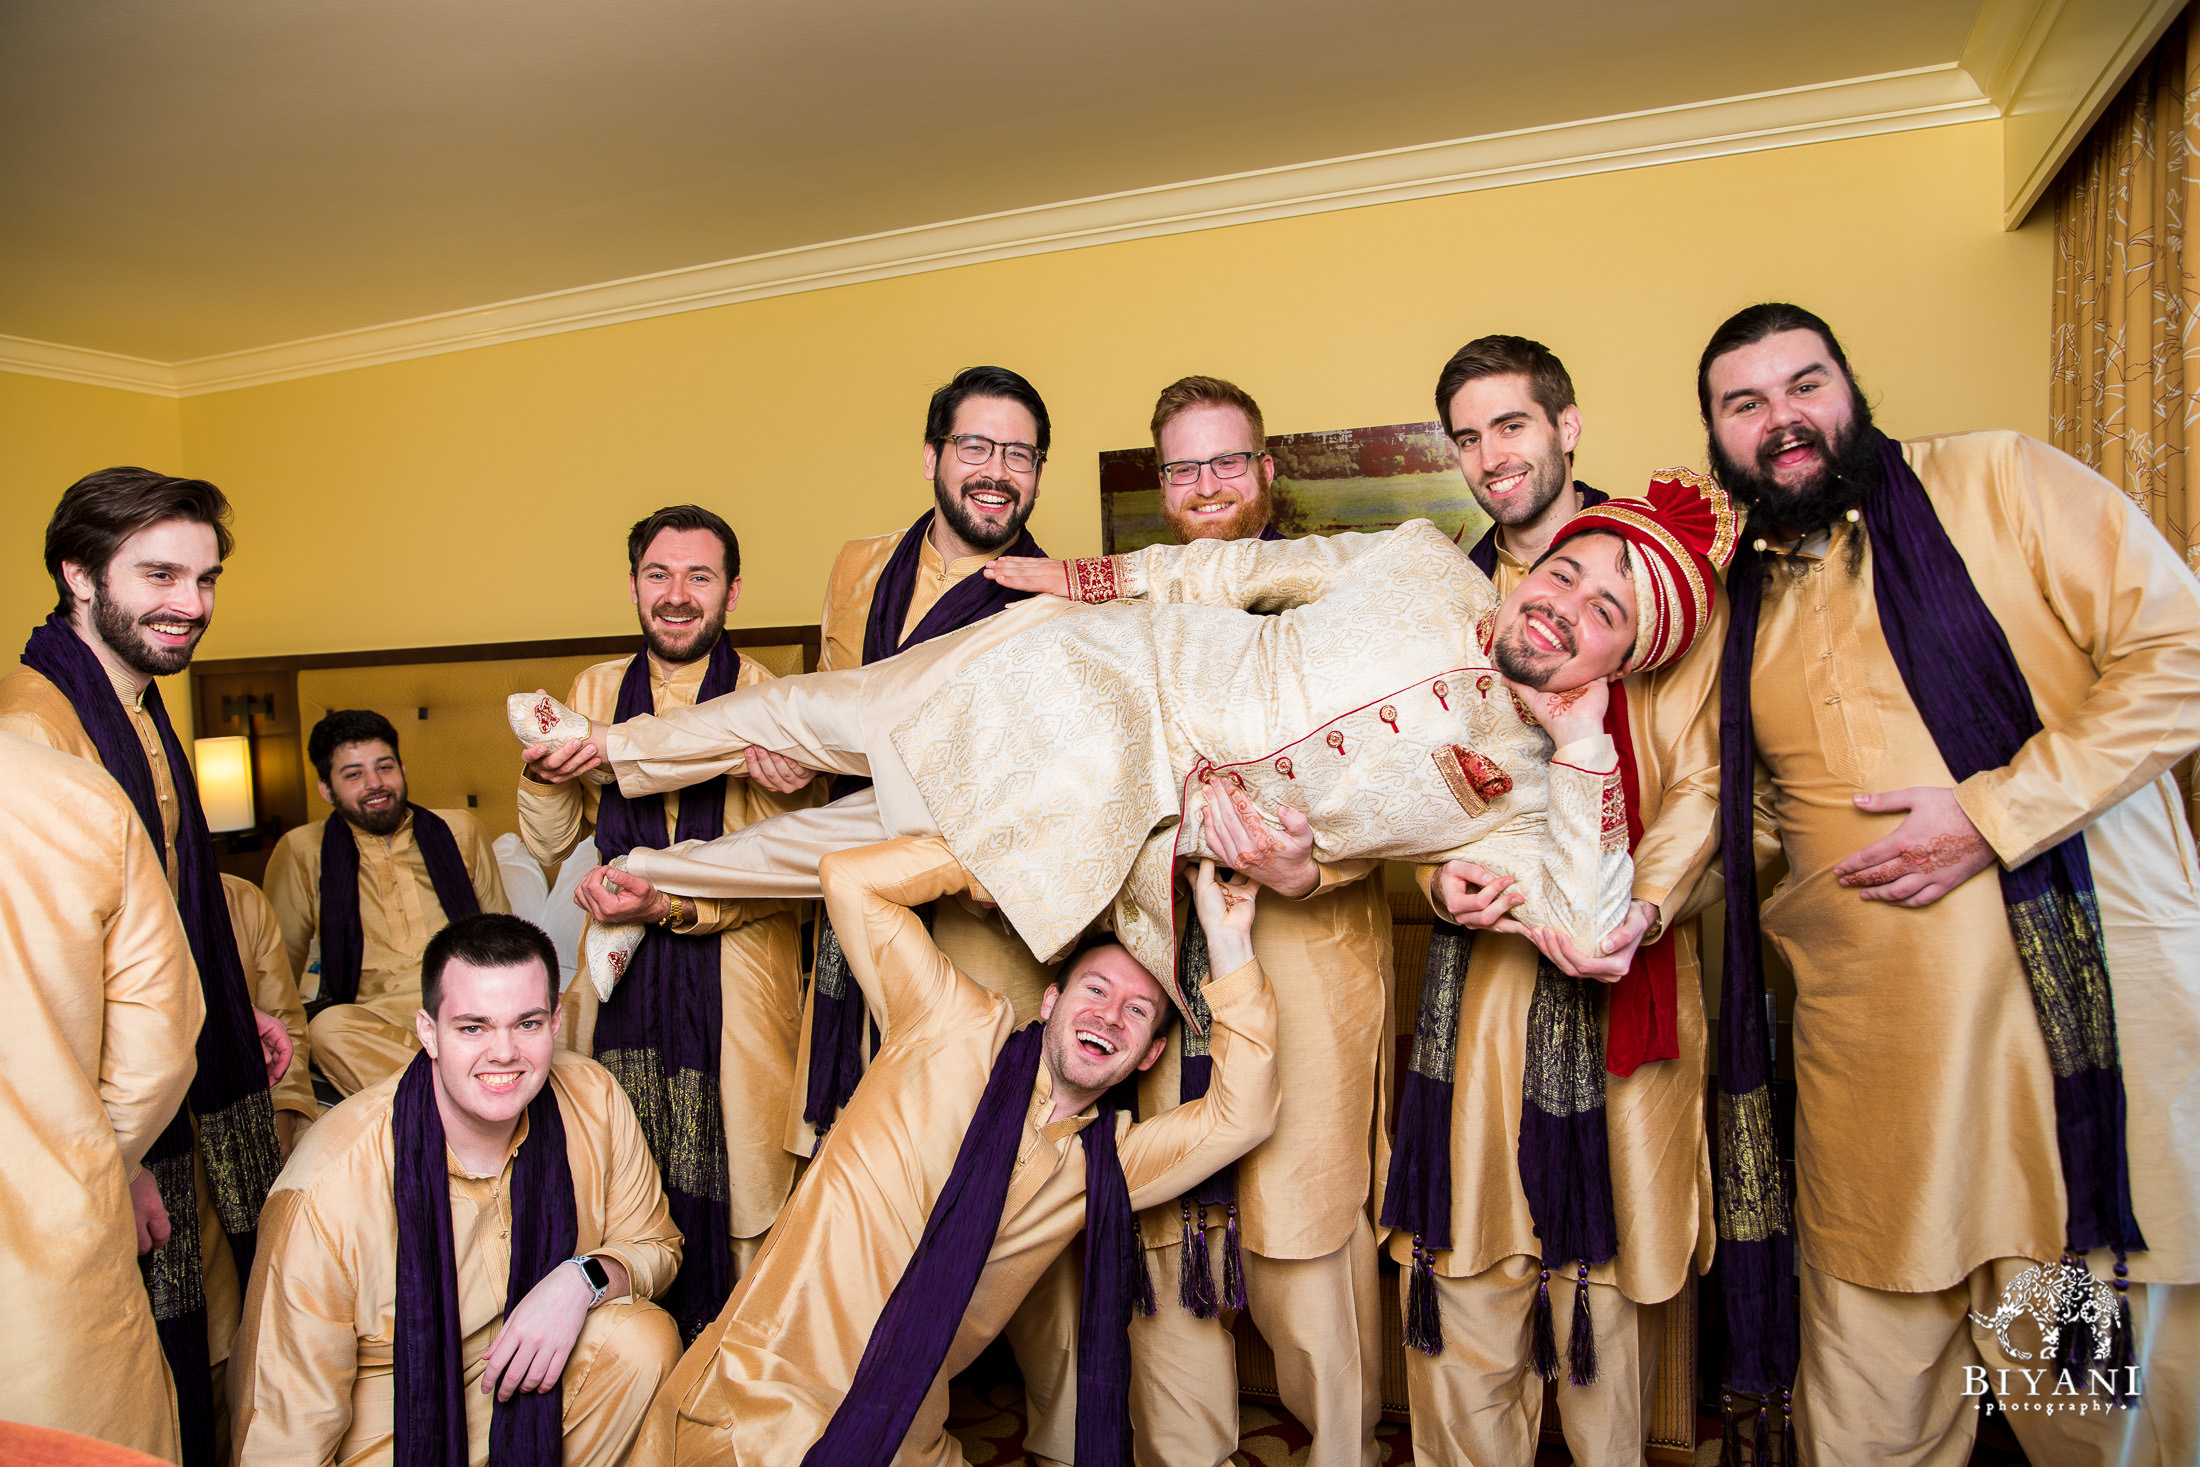 Groom and his groomsmen getting ready and taking silly photos during the Indian Fusion wedding in San Antonio, Tx.